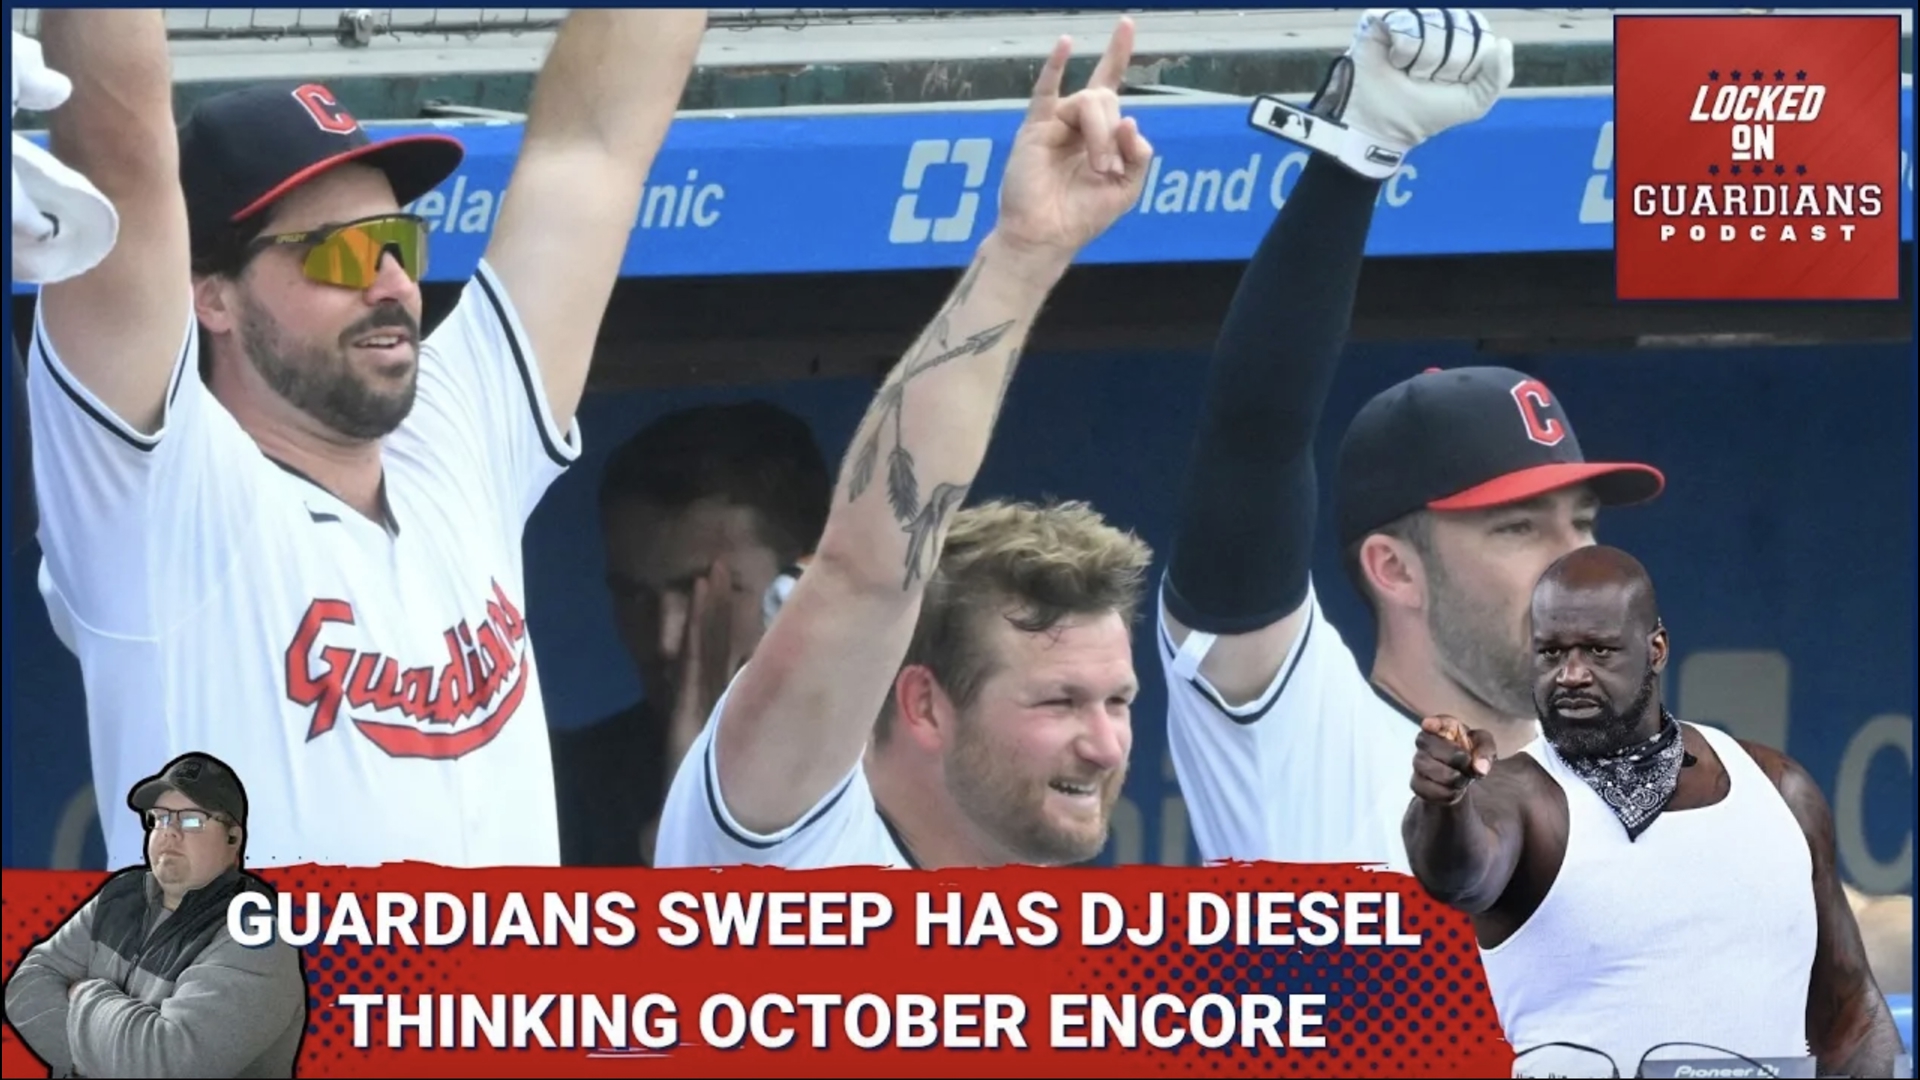 The Cleveland Guardians rocked the Toronto Blue Jays with a sweep as DJ Diesel rocked Progressive Field Saturday night.